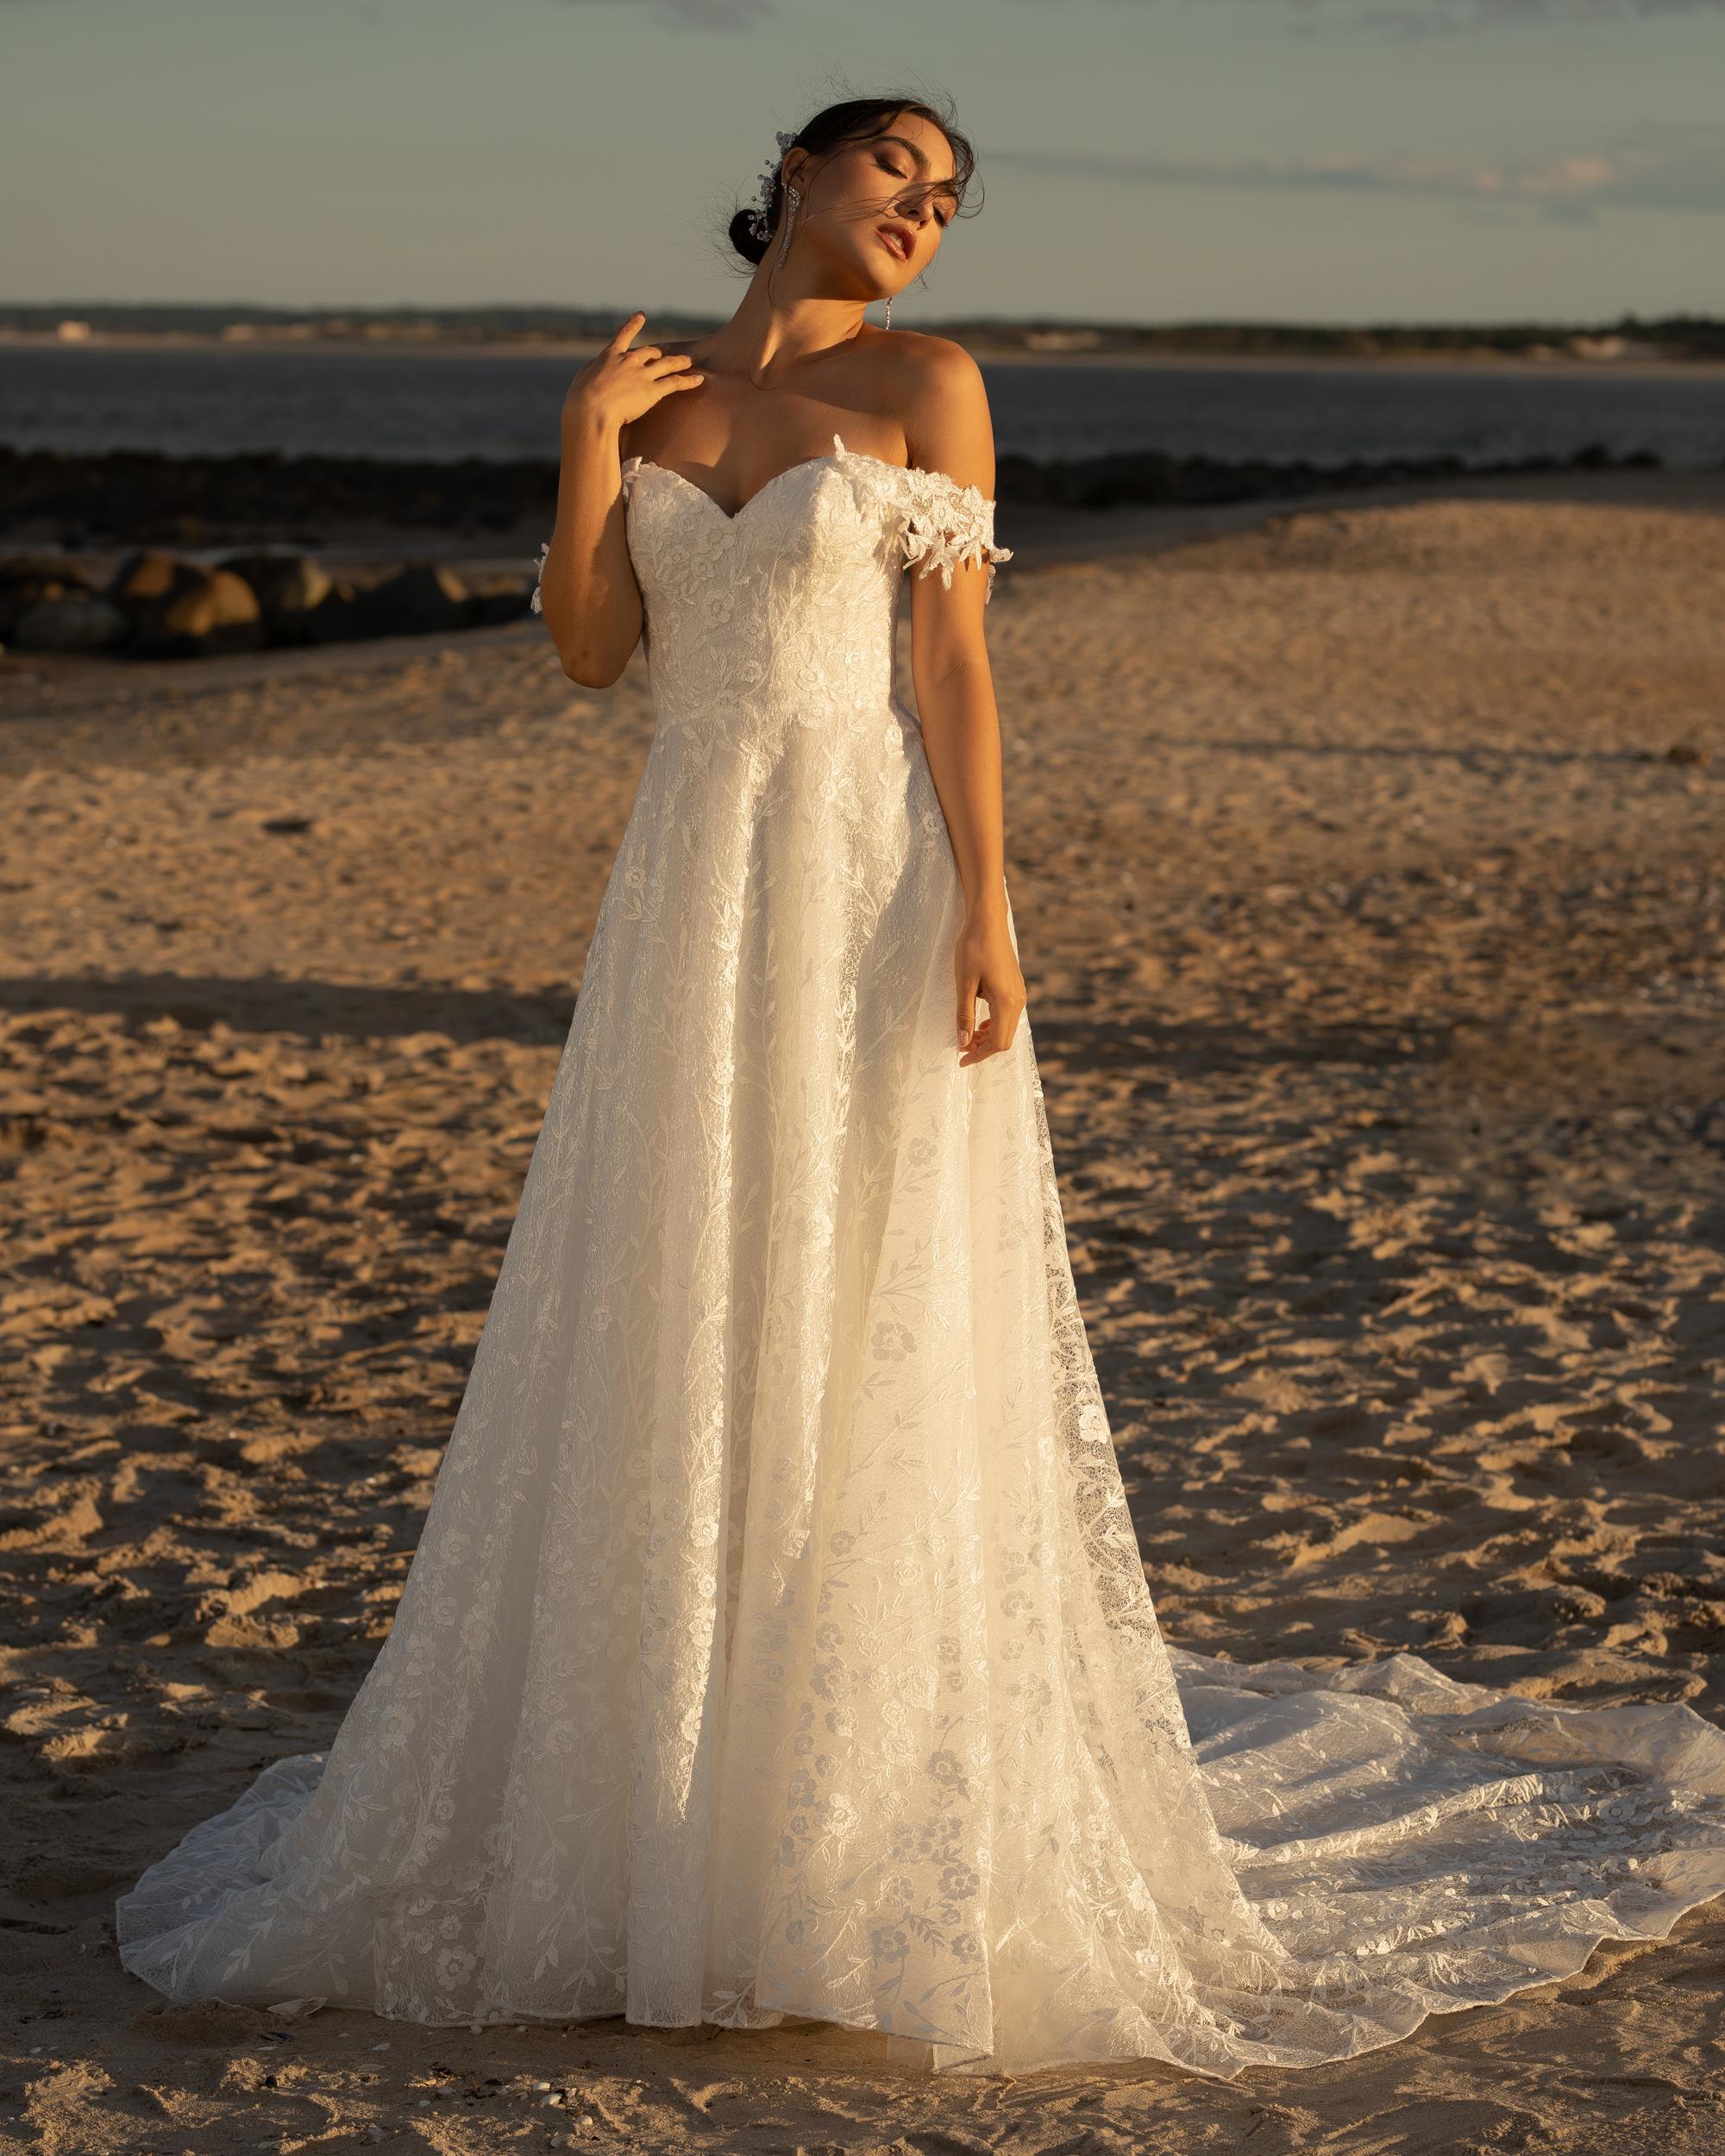 Photo of the model wearing a bridal gown